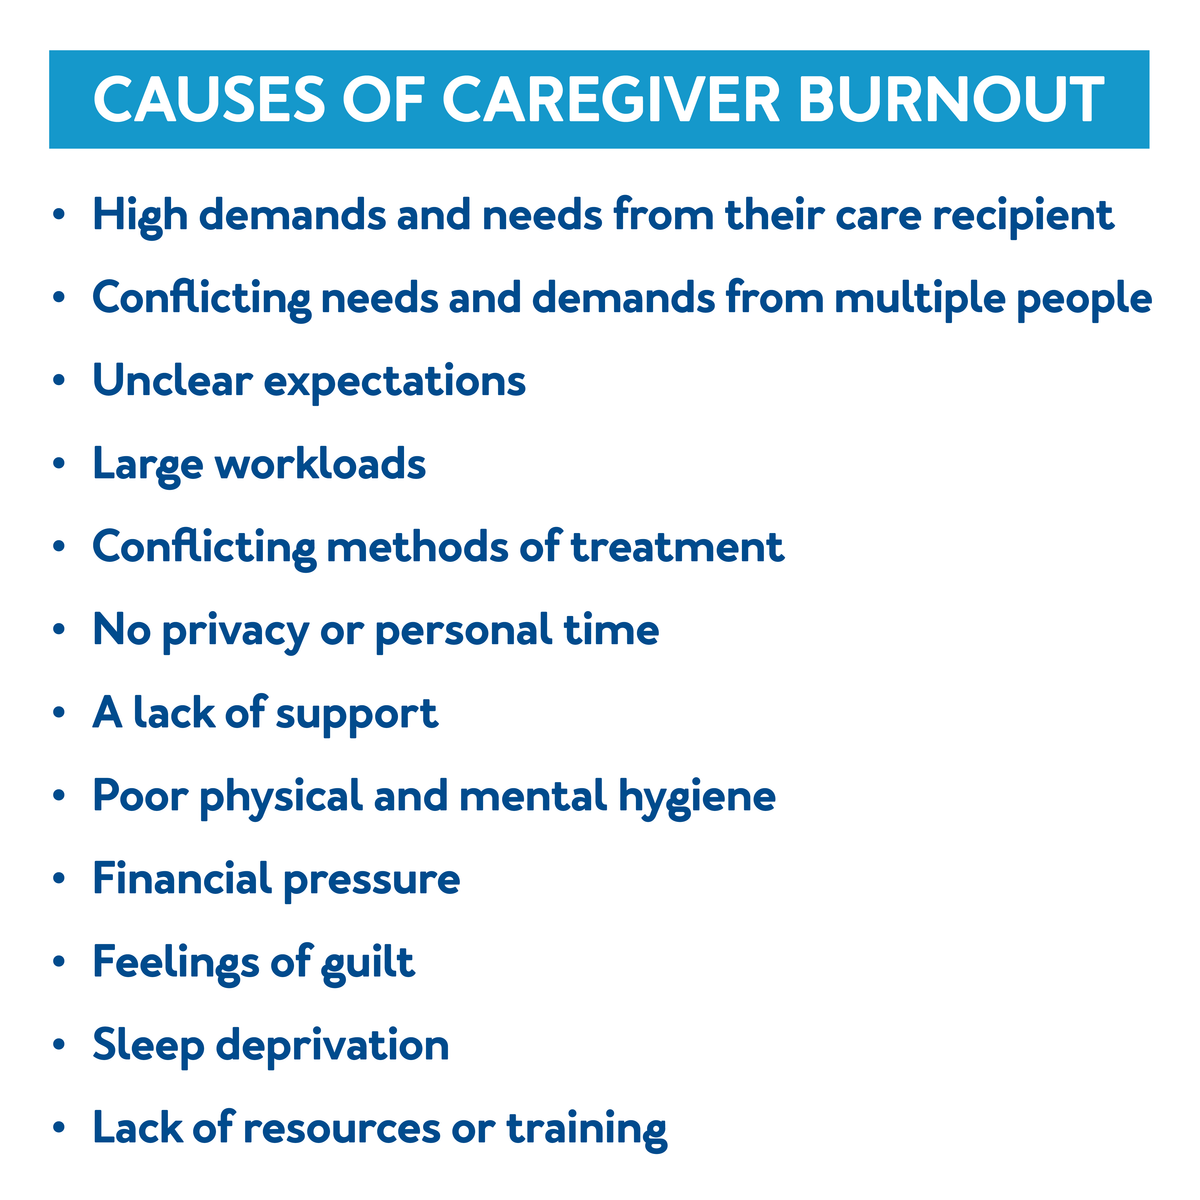 Causes of Caregiver Burnout : Further details are provided below